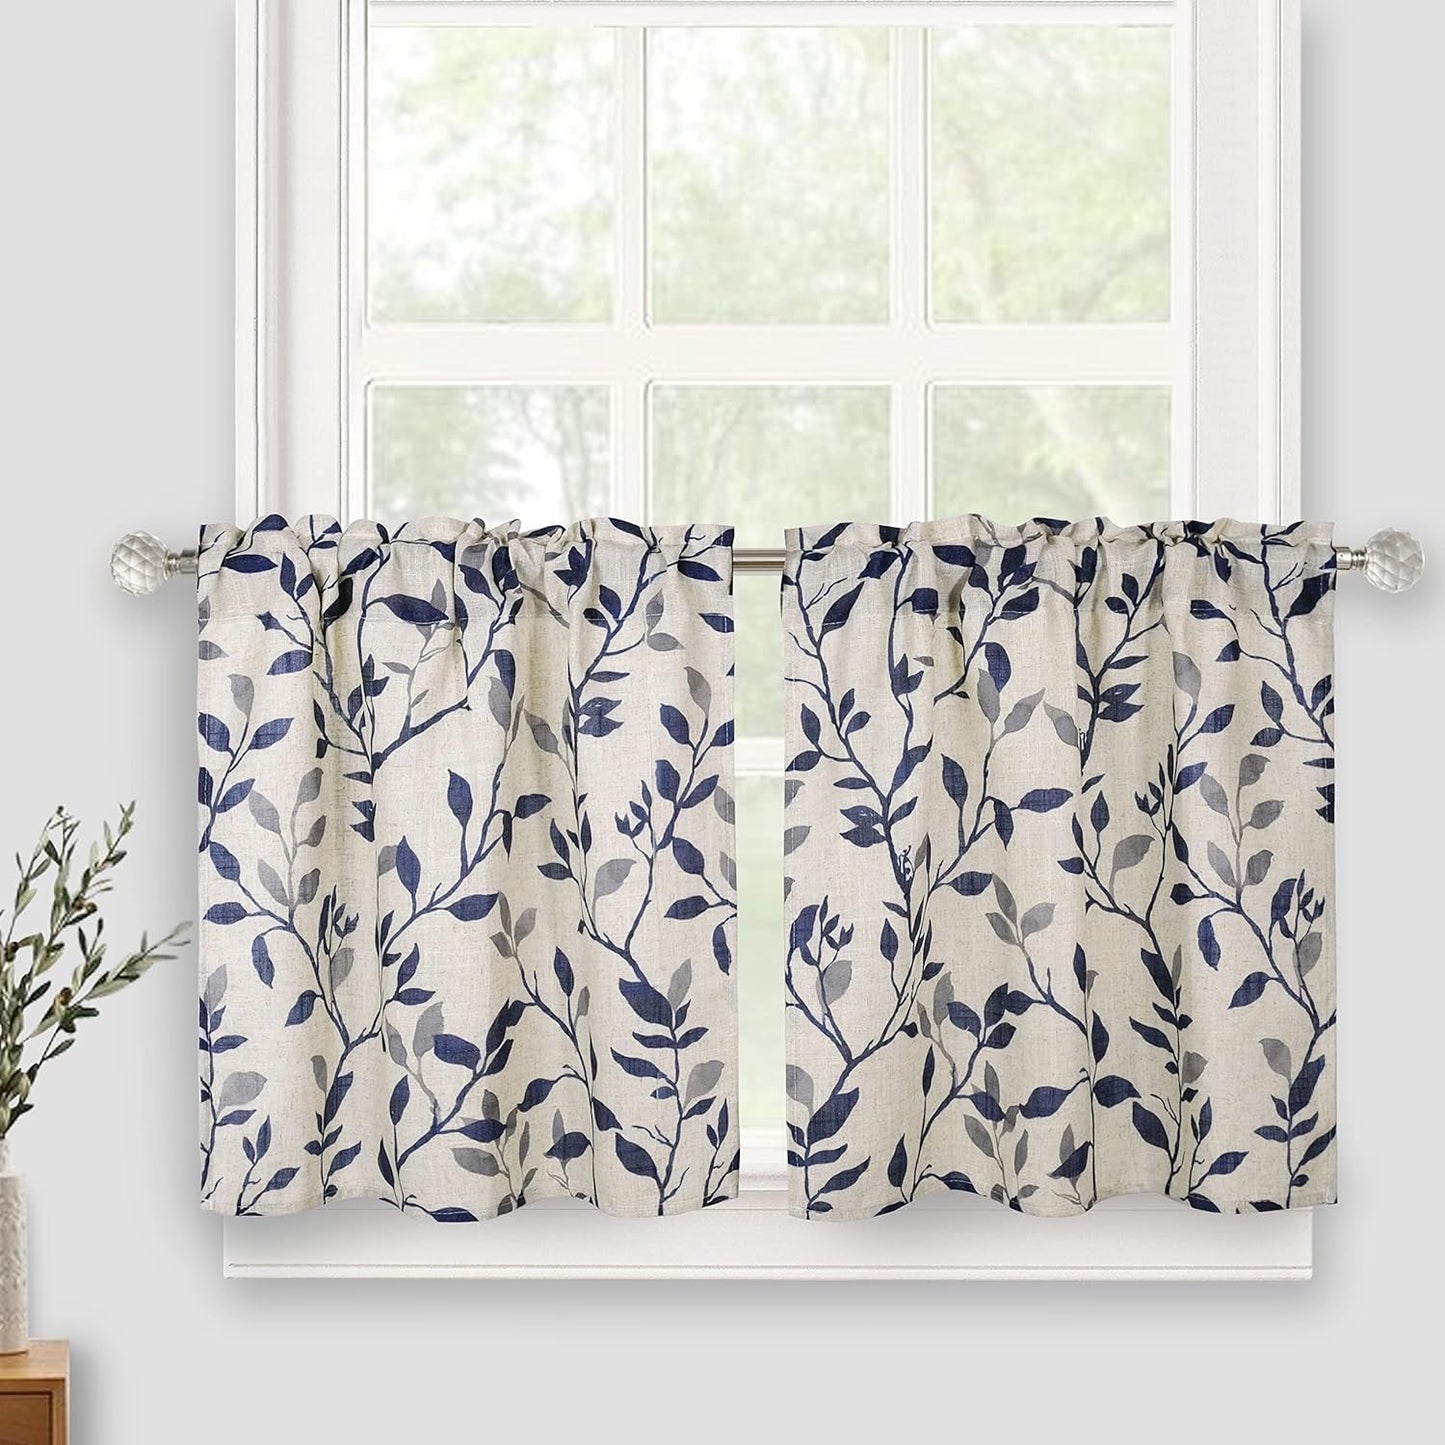 Linen Kitchen Valance, Tree Leaves Printed Window Curtain Valances for Bathroom Bedroom Living Room Farmhouse Decor Rod Pocket Short Cafe Curtains 54 by 14 Inches Gray